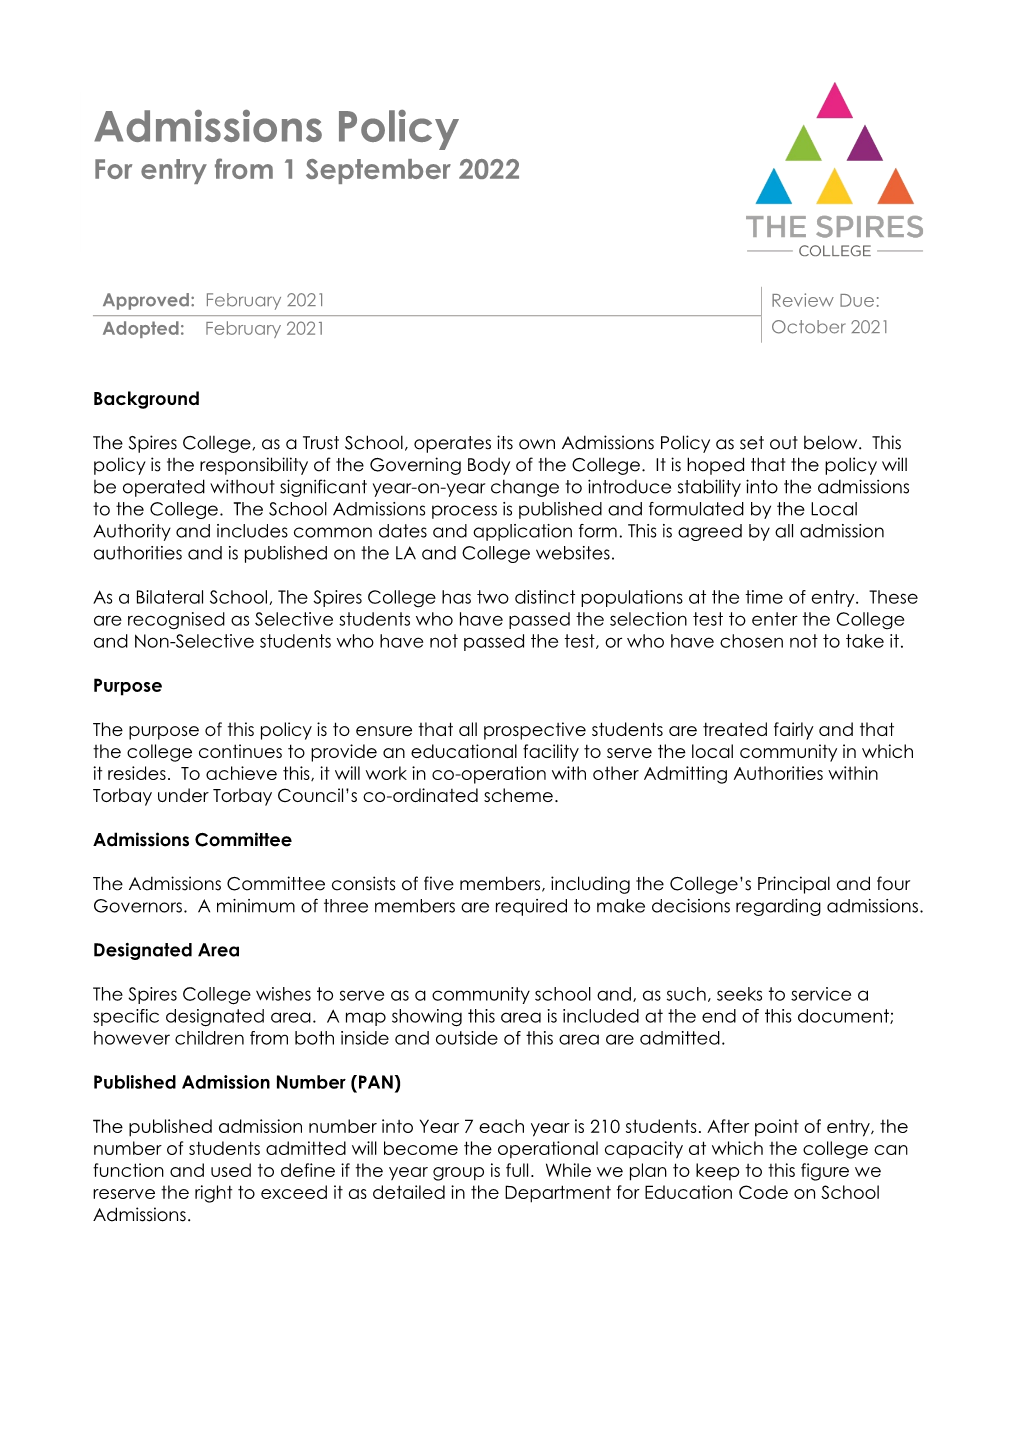 Department for Education Code on School Admissions